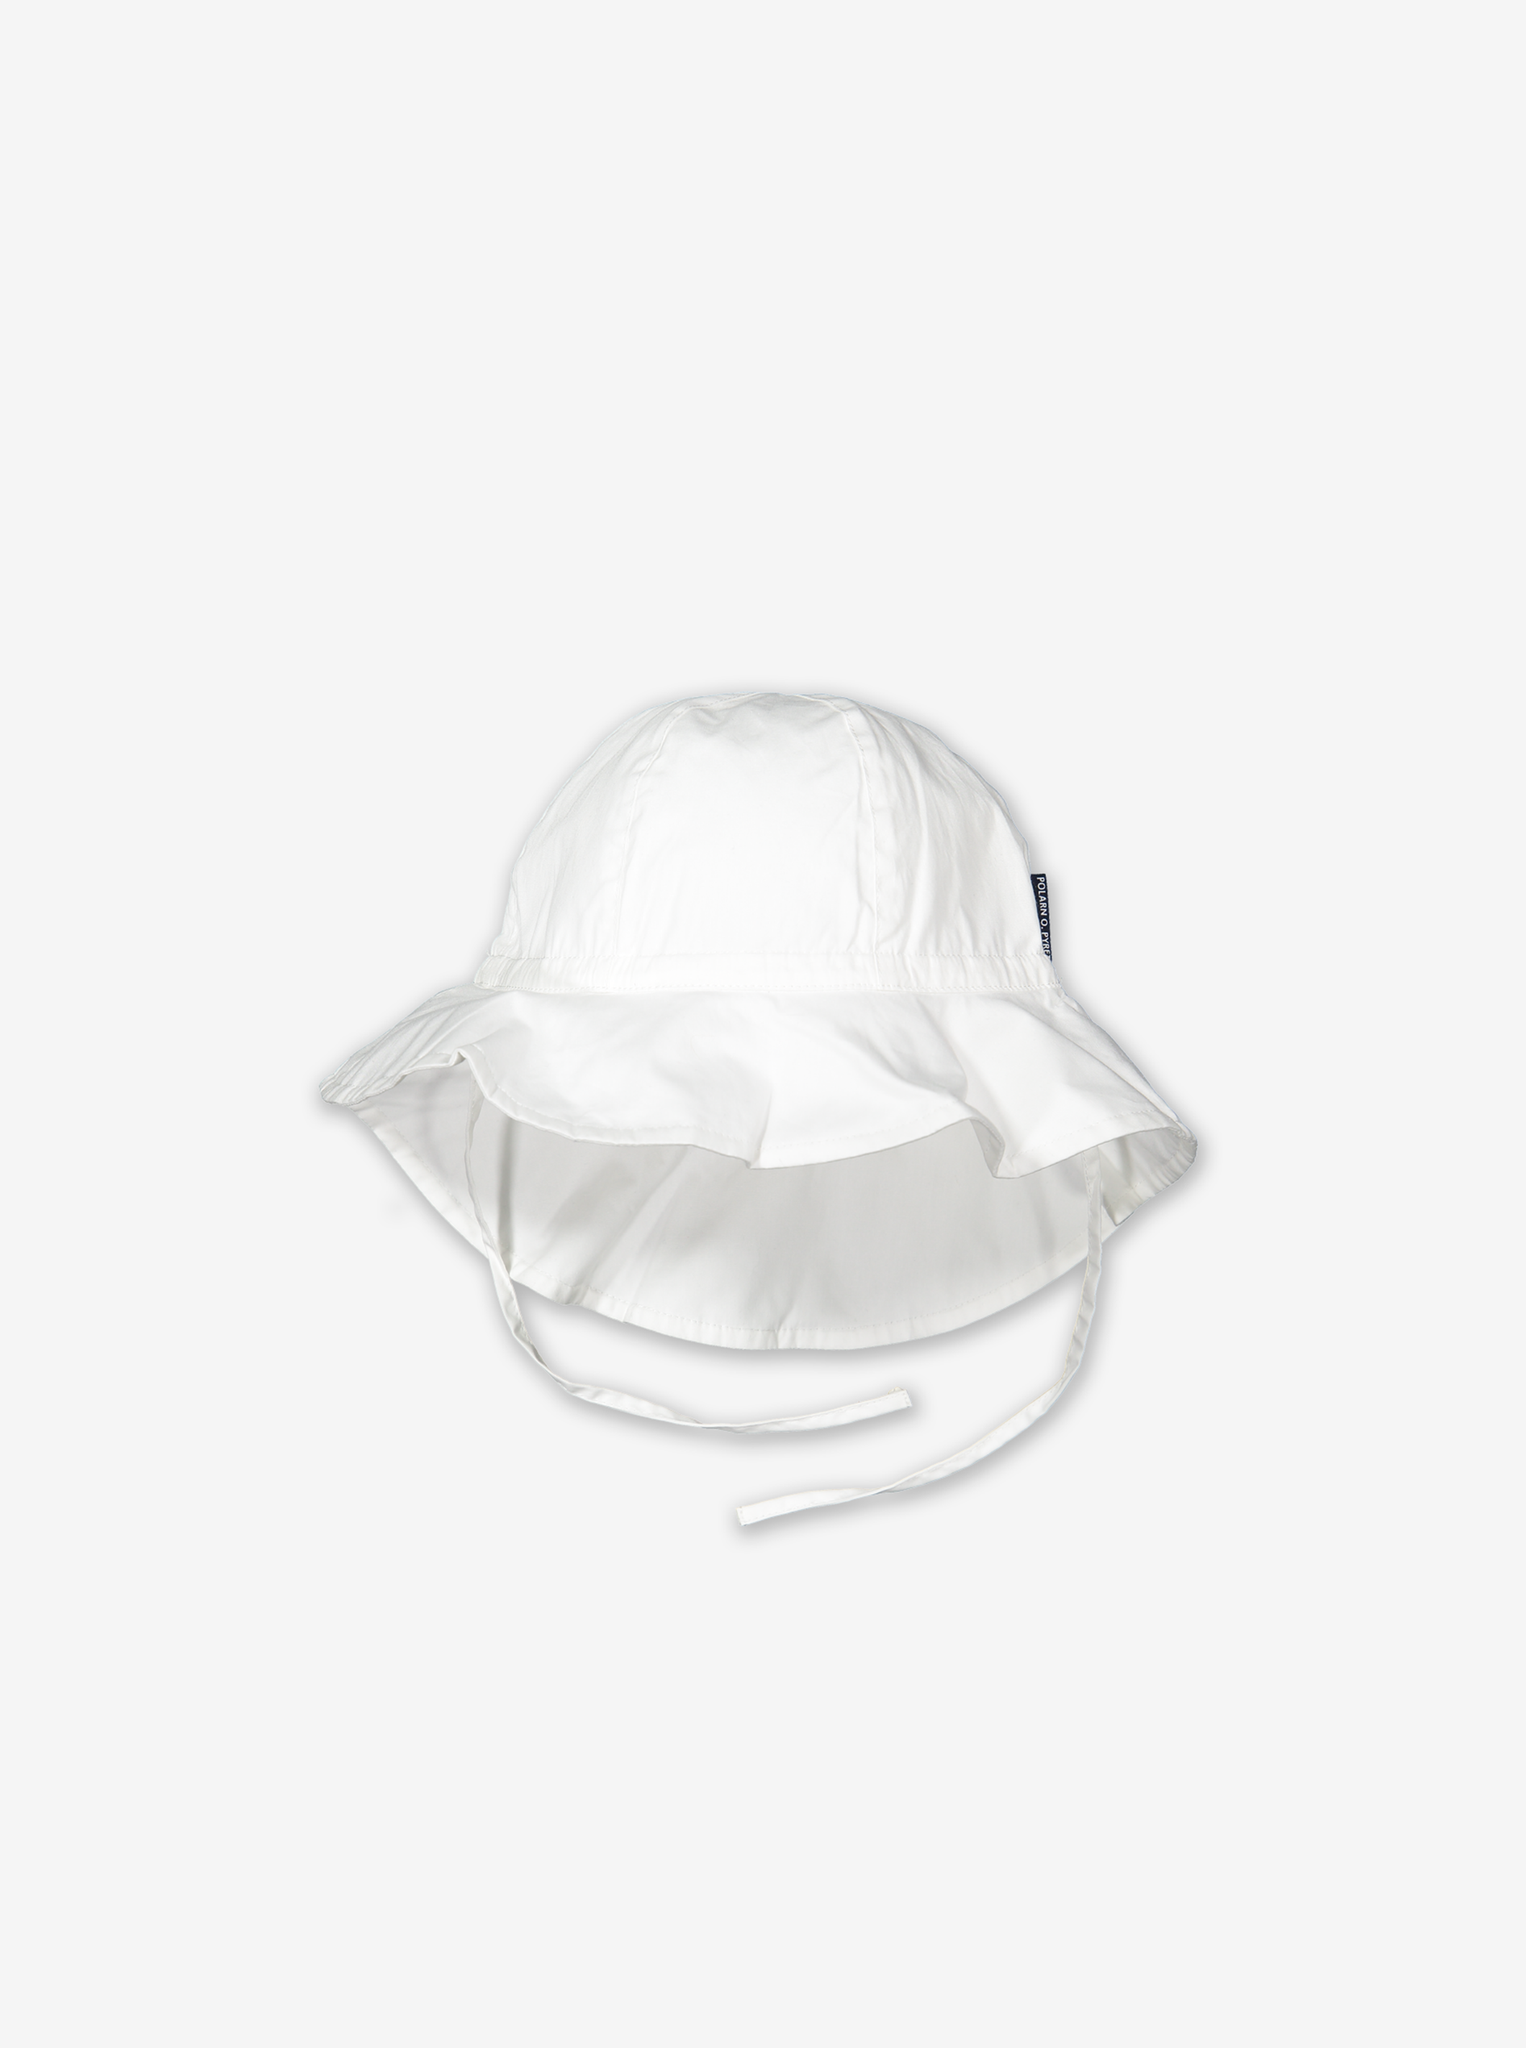 Unisex kids sun hat in white with an adjustable elastic band. Provides UV protection and made with 100% organic cotton.